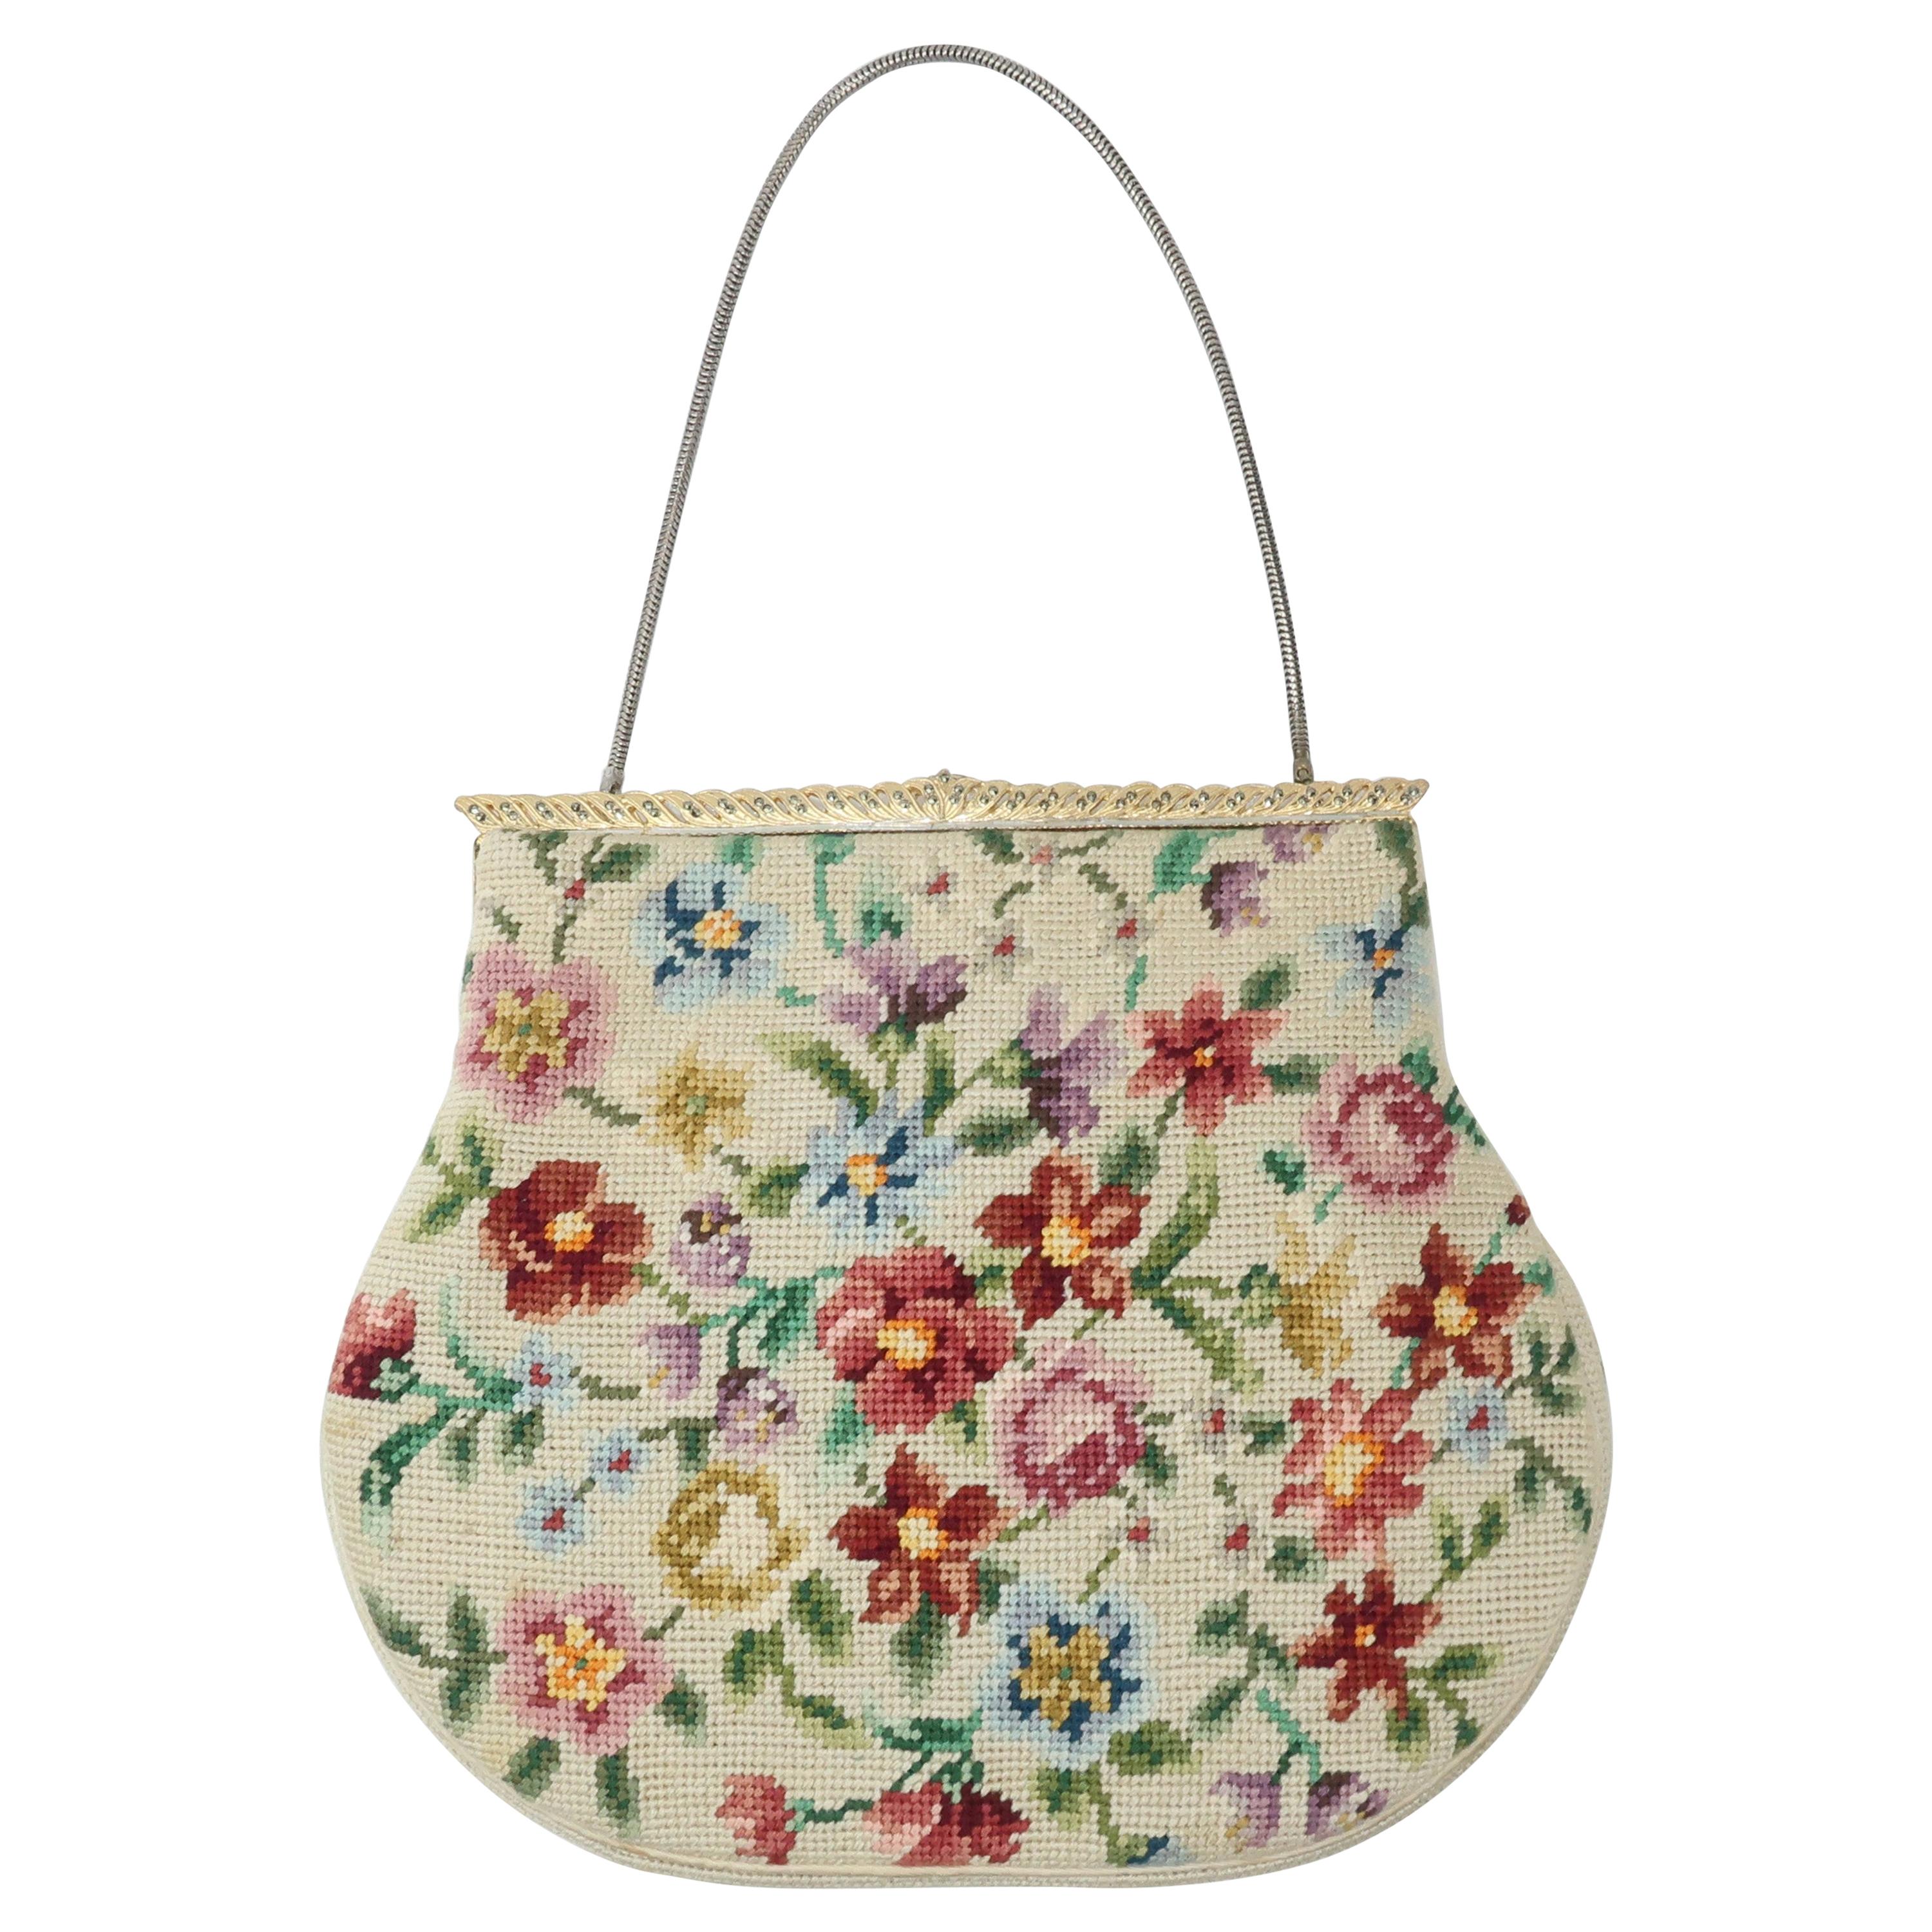 Switkes Floral Needlepoint Handbag With Decorated Frame, C.1950